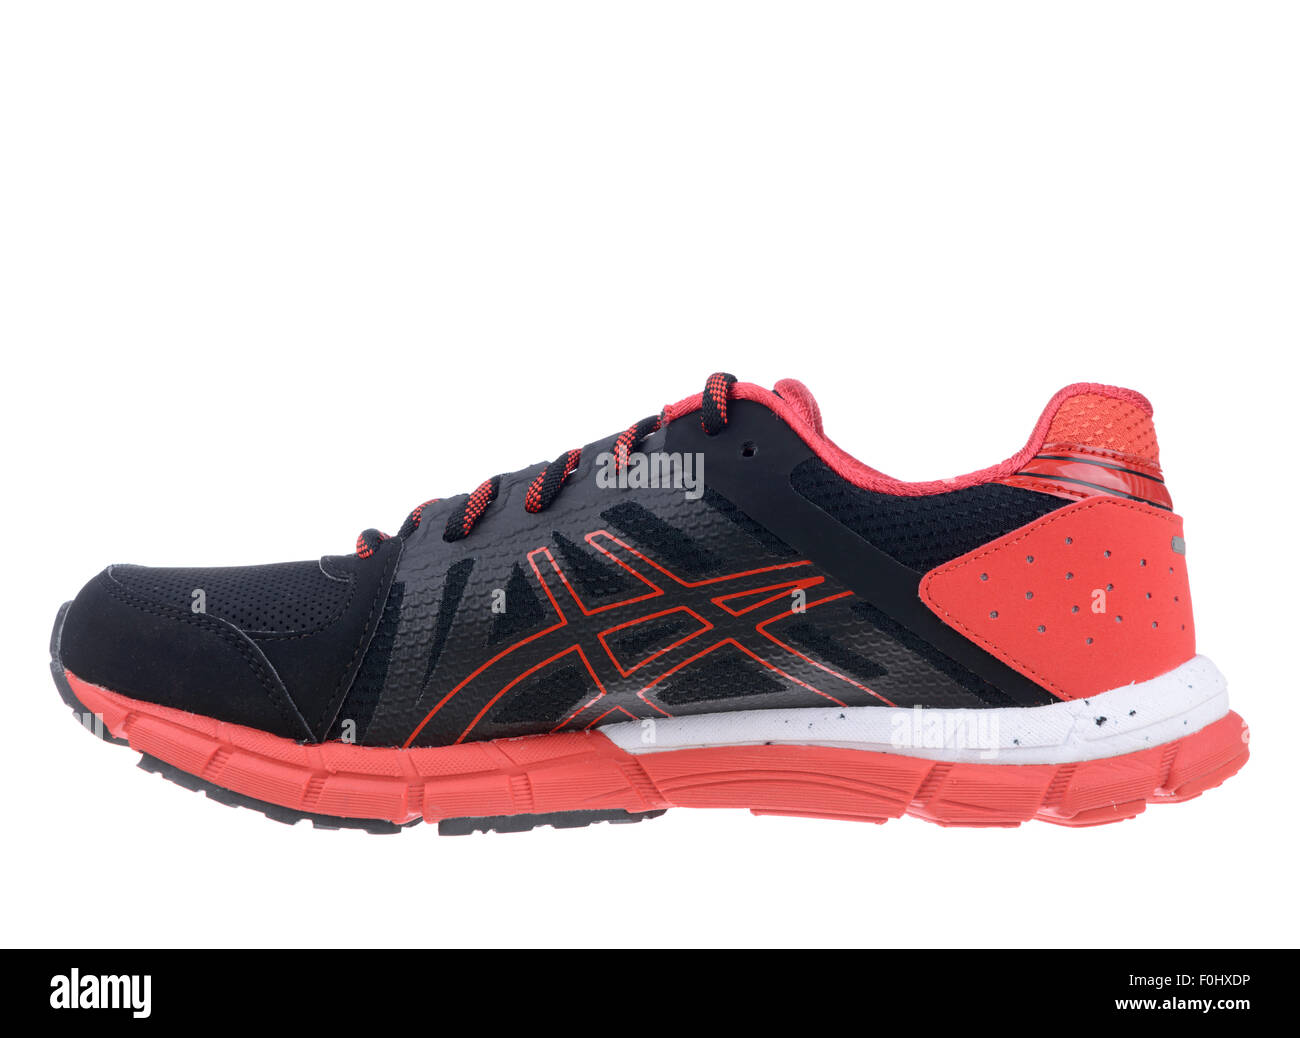 Asics Gel High Resolution Stock Photography and Images - Alamy